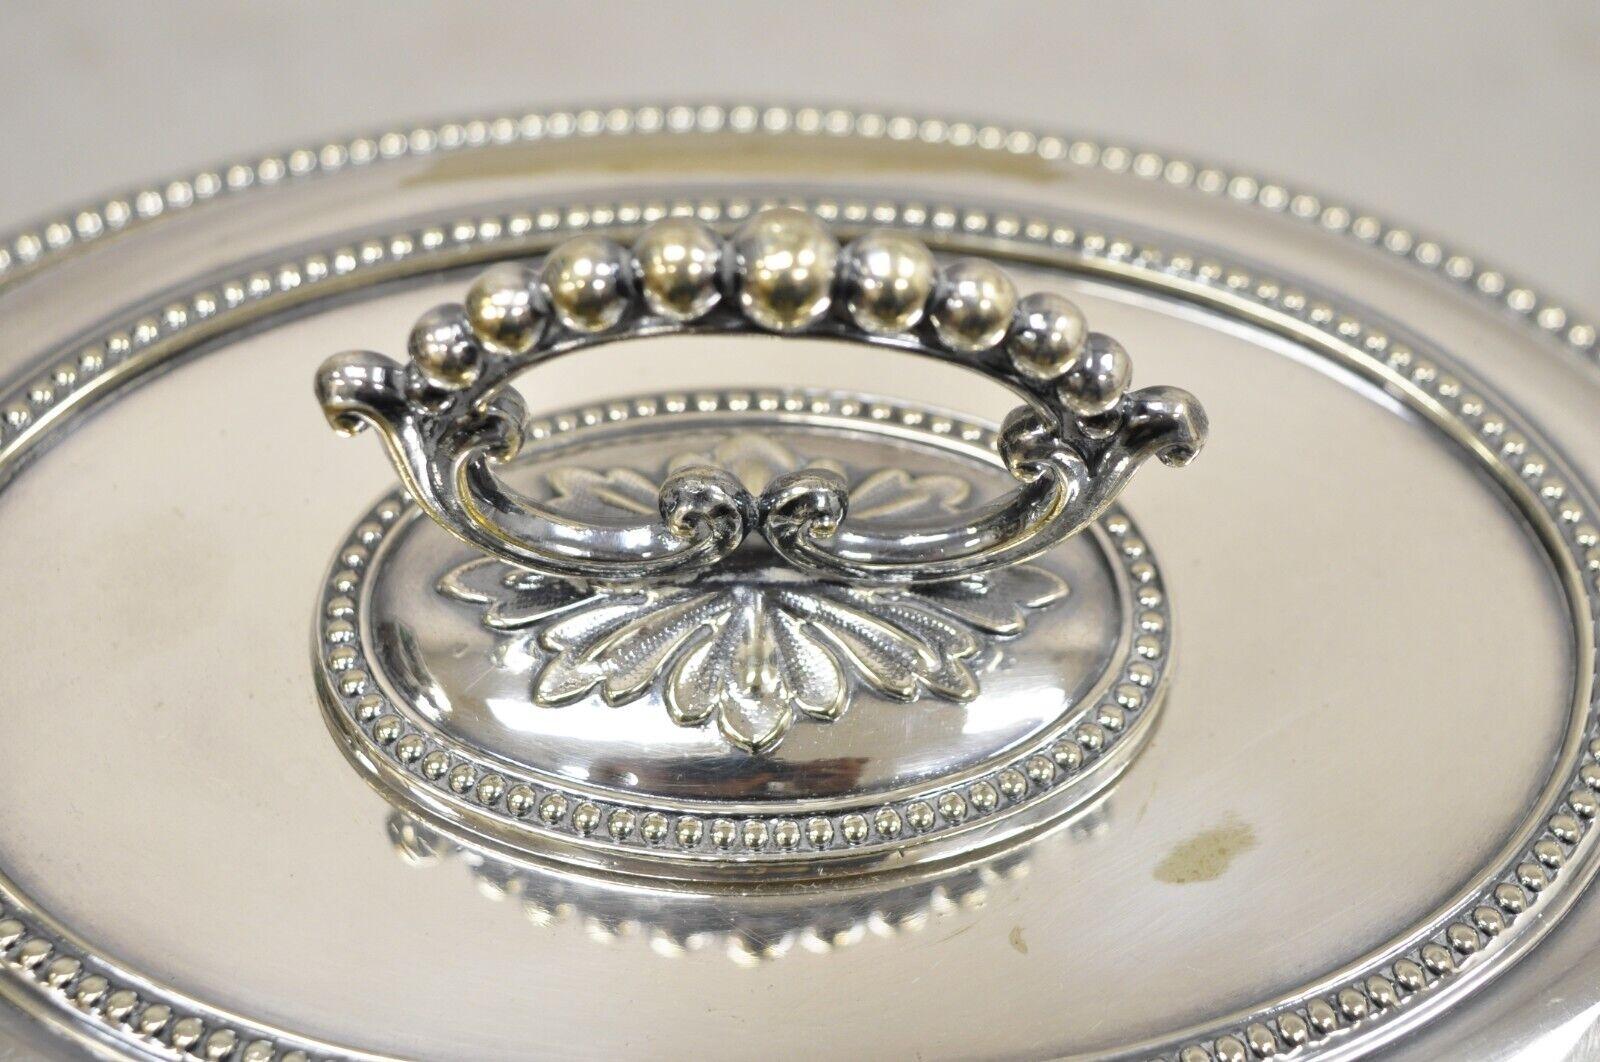 Mappin & Webb's Prince's Plate English Sheffield Silver Plated Covered Dish (Plat couvert en argent) en vente 1